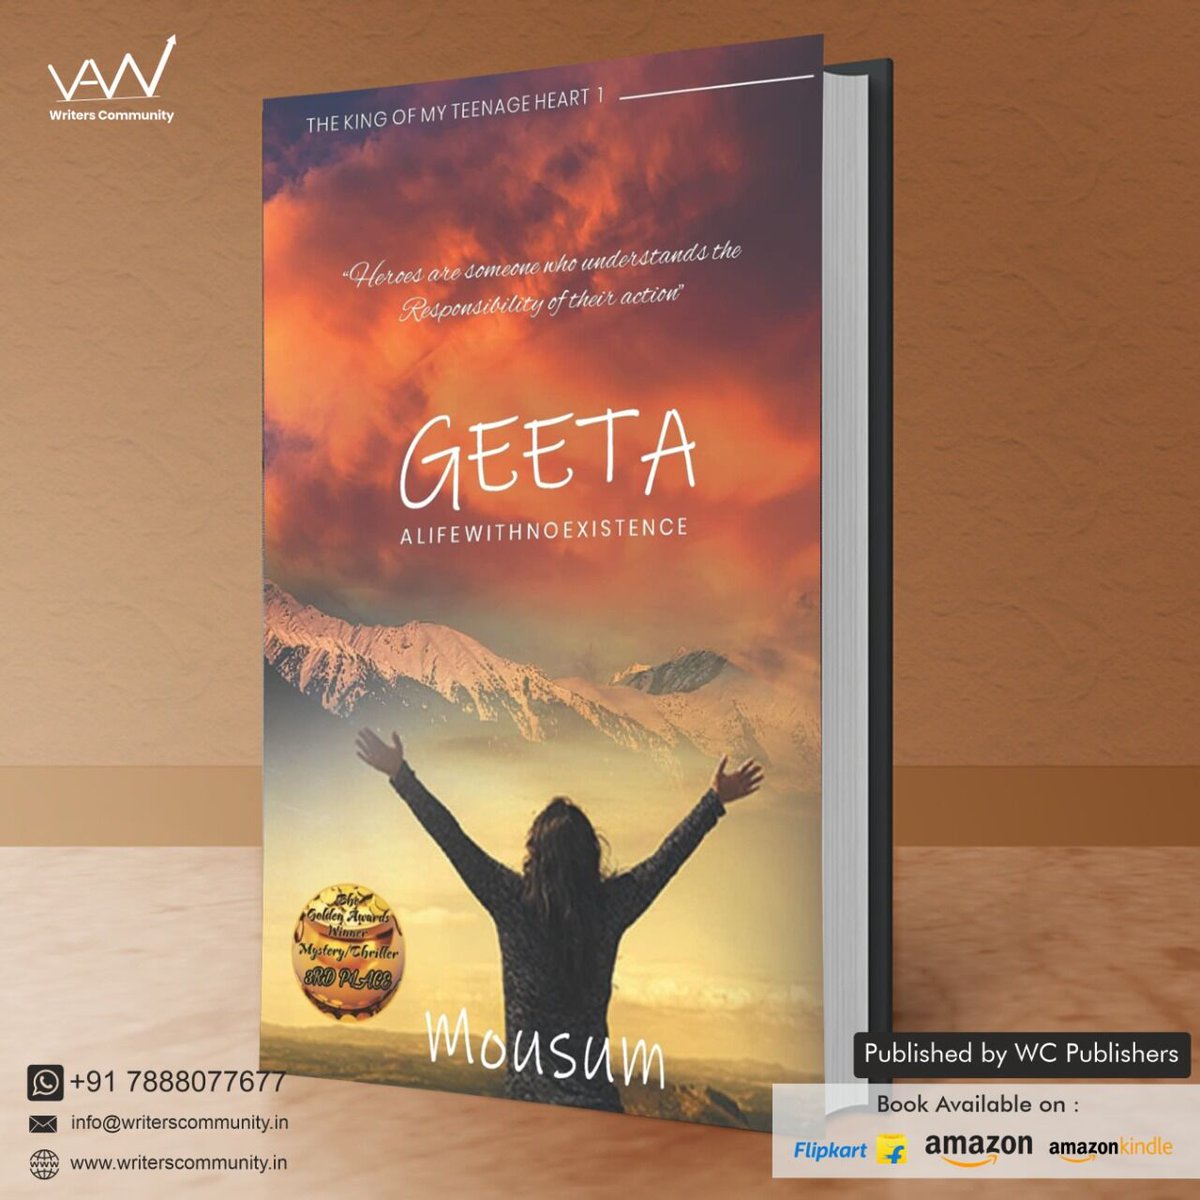 Geeta-A-life-with-No-Existence-by-Mousum About Book This is a psychological thriller exploring the quest of a brother-sister duo centered around a neighborhood kid who quickly becomes one of their good friends. But something is amiss in this family and the way they treat their